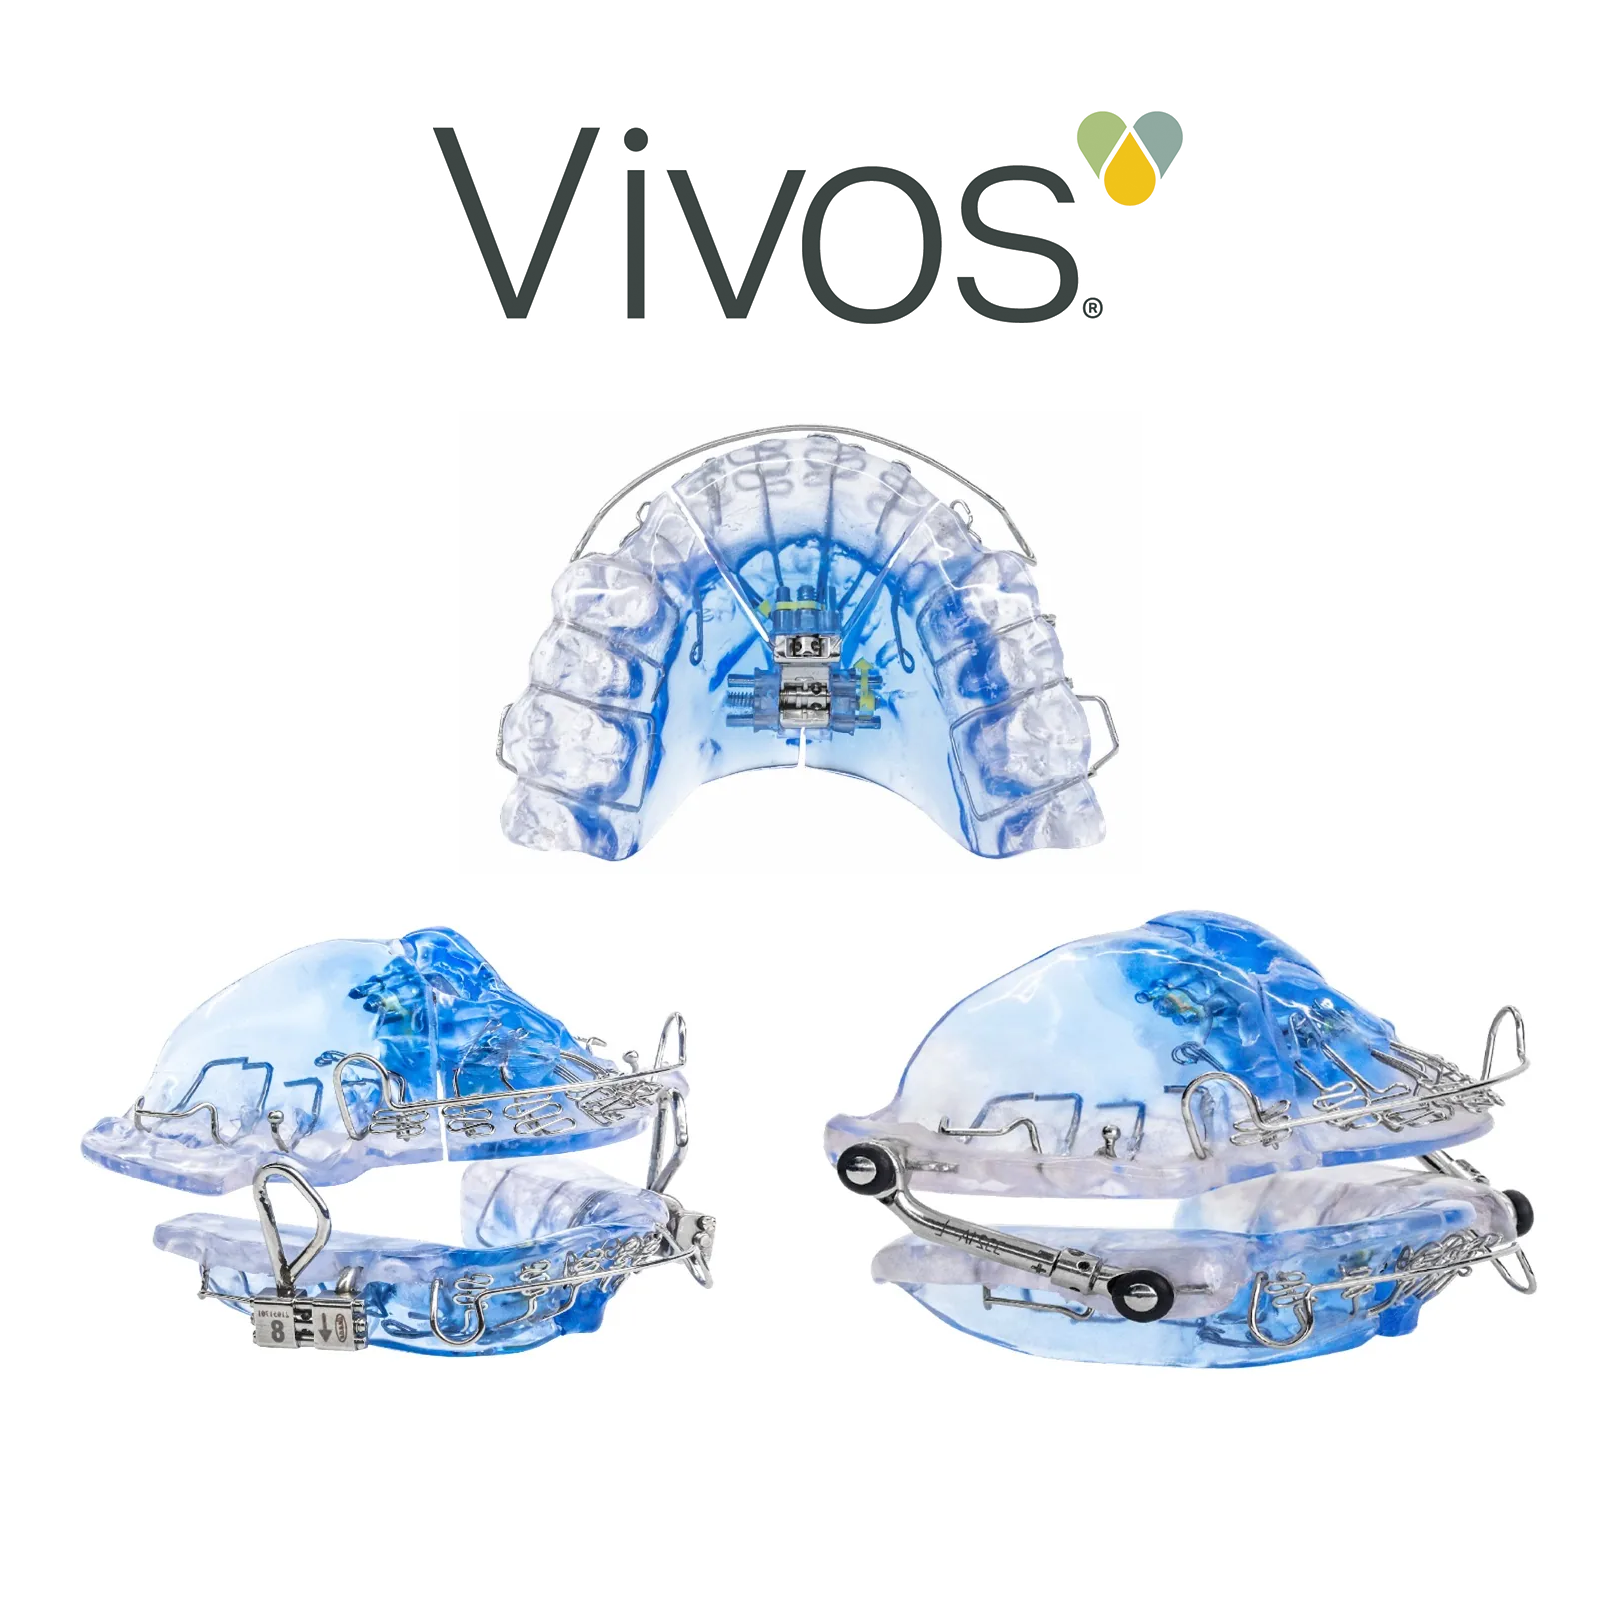 Vivos Therapeutics Receives First Ever FDA 510(k) Clearance for Treating Severe Obstructive Sleep Apnea With Oral Appliance Therapy